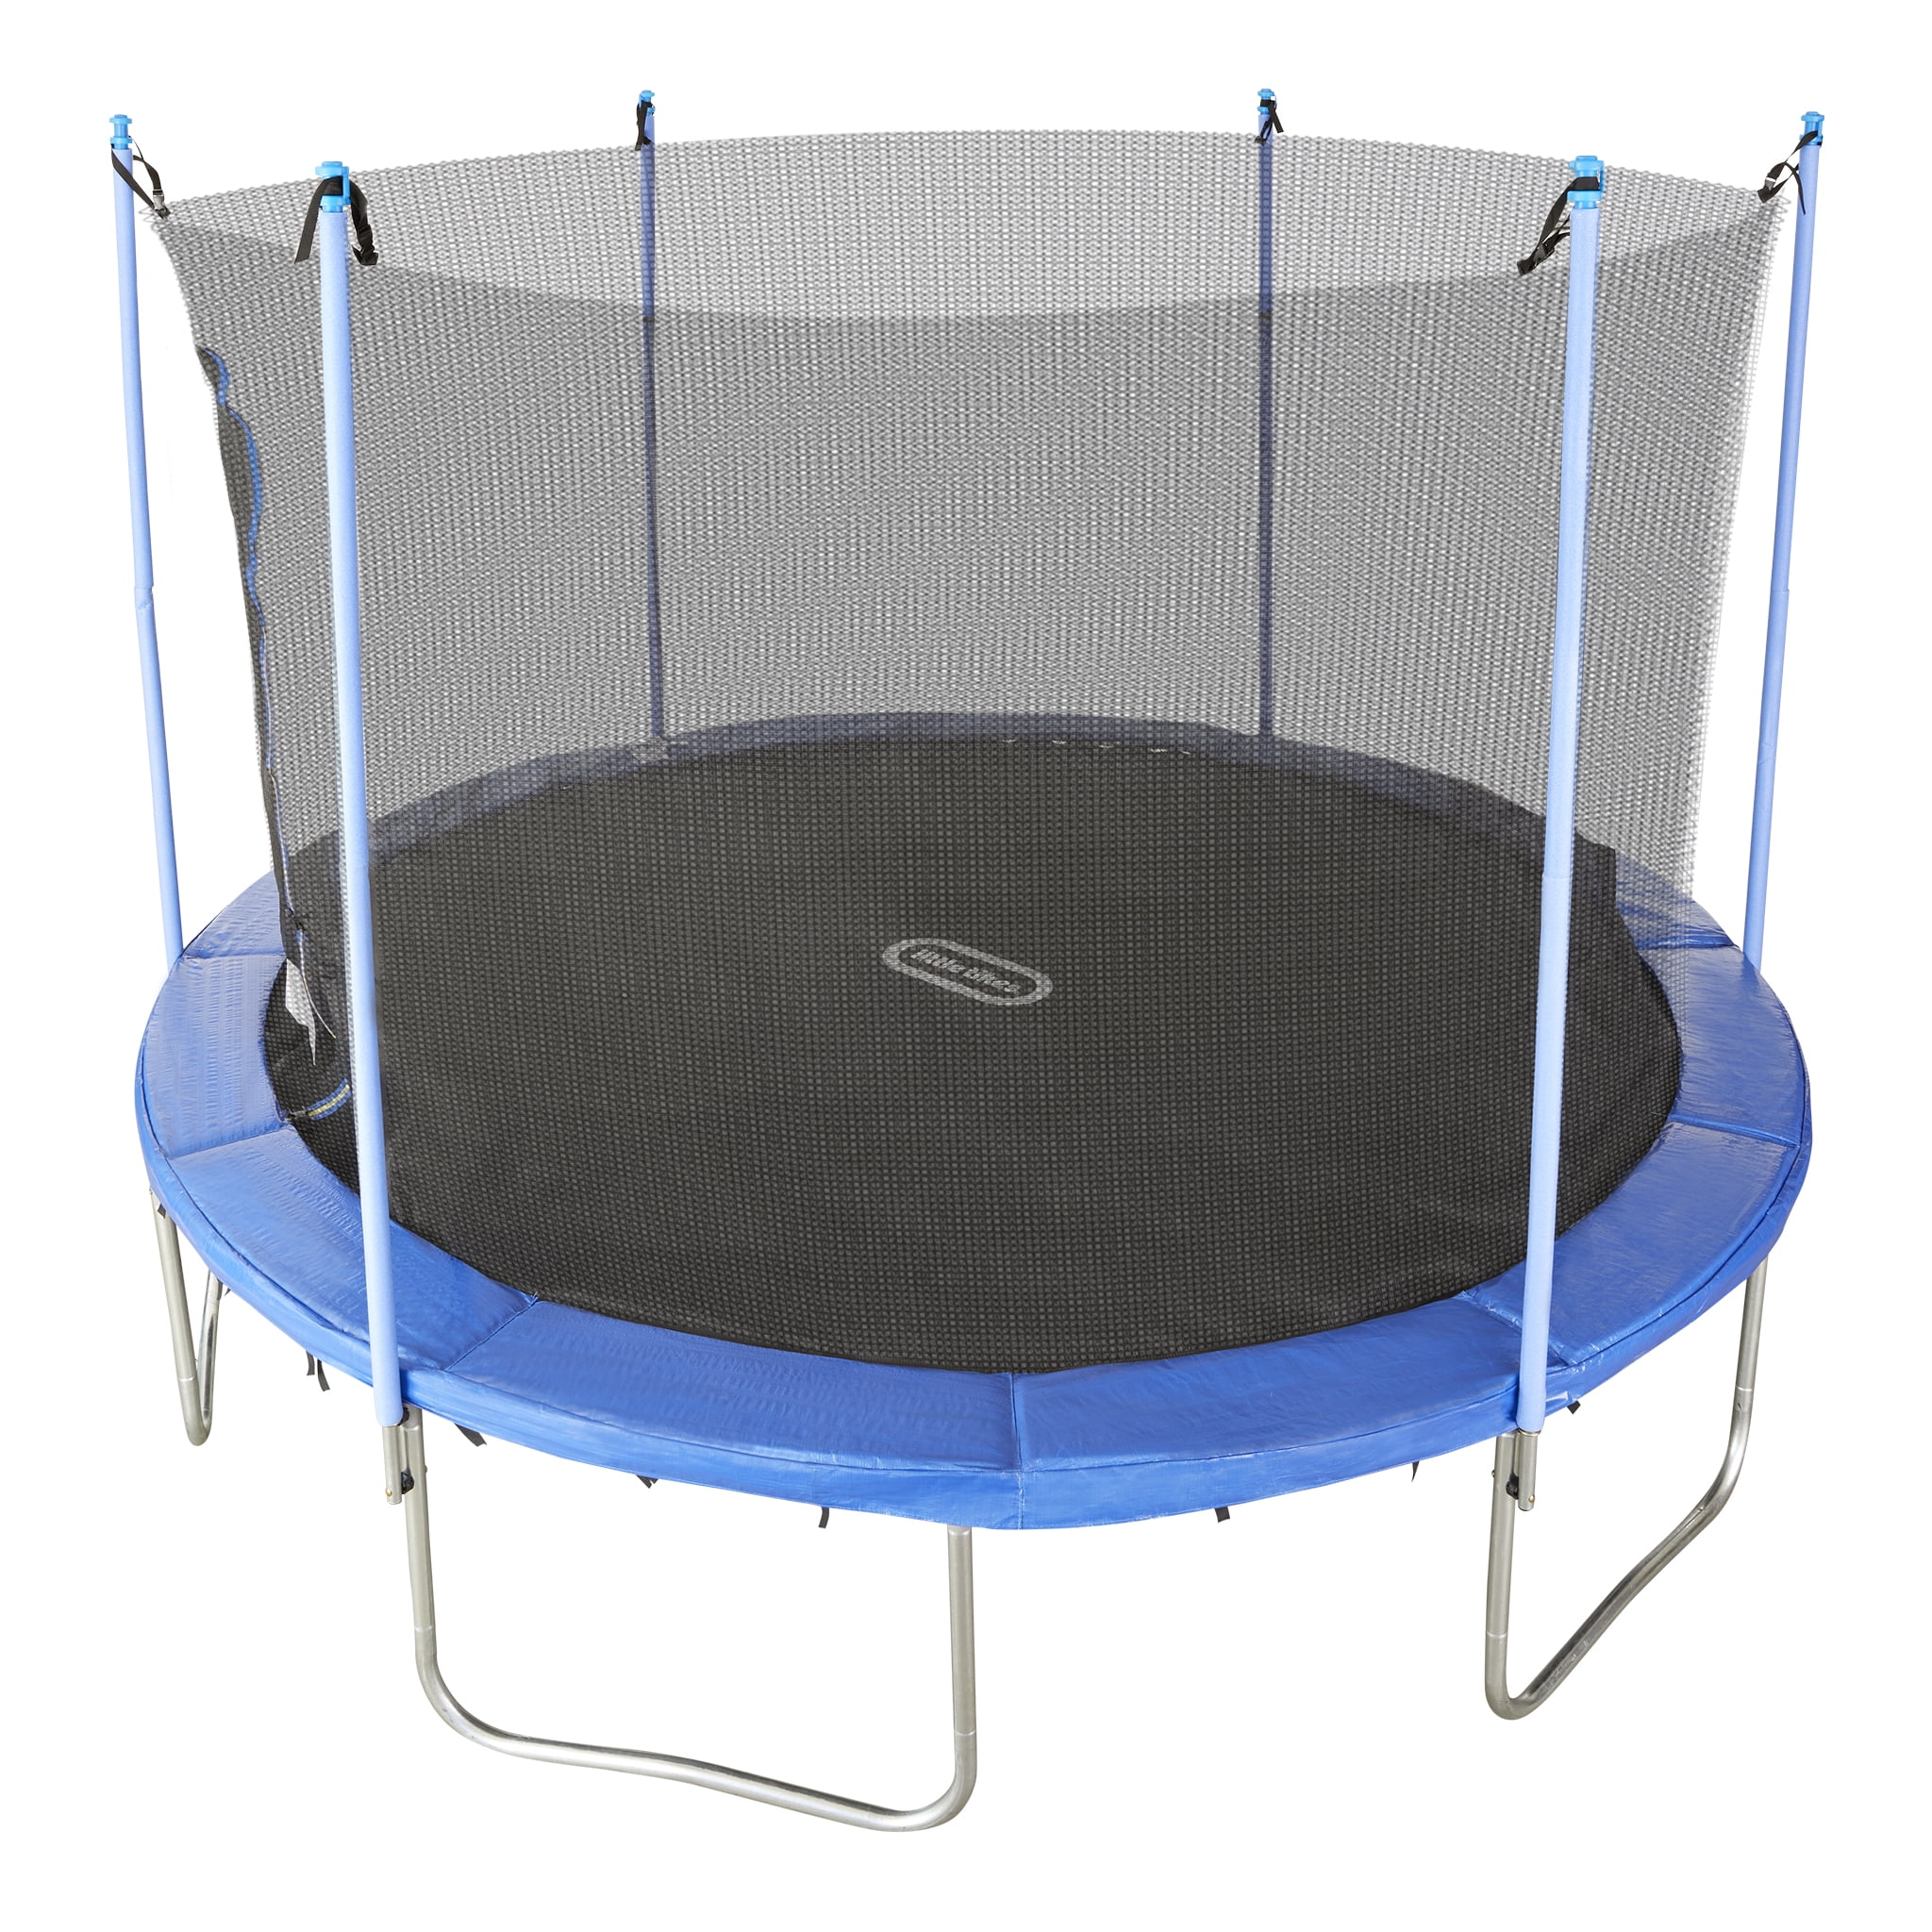 Little Tikes Mega 12' Trampoline with with Safety Net and Built-in Safety Features, Backyard Outdoor Play, For Kids Boys Girls Ages 6 7 8+ - Walmart.com